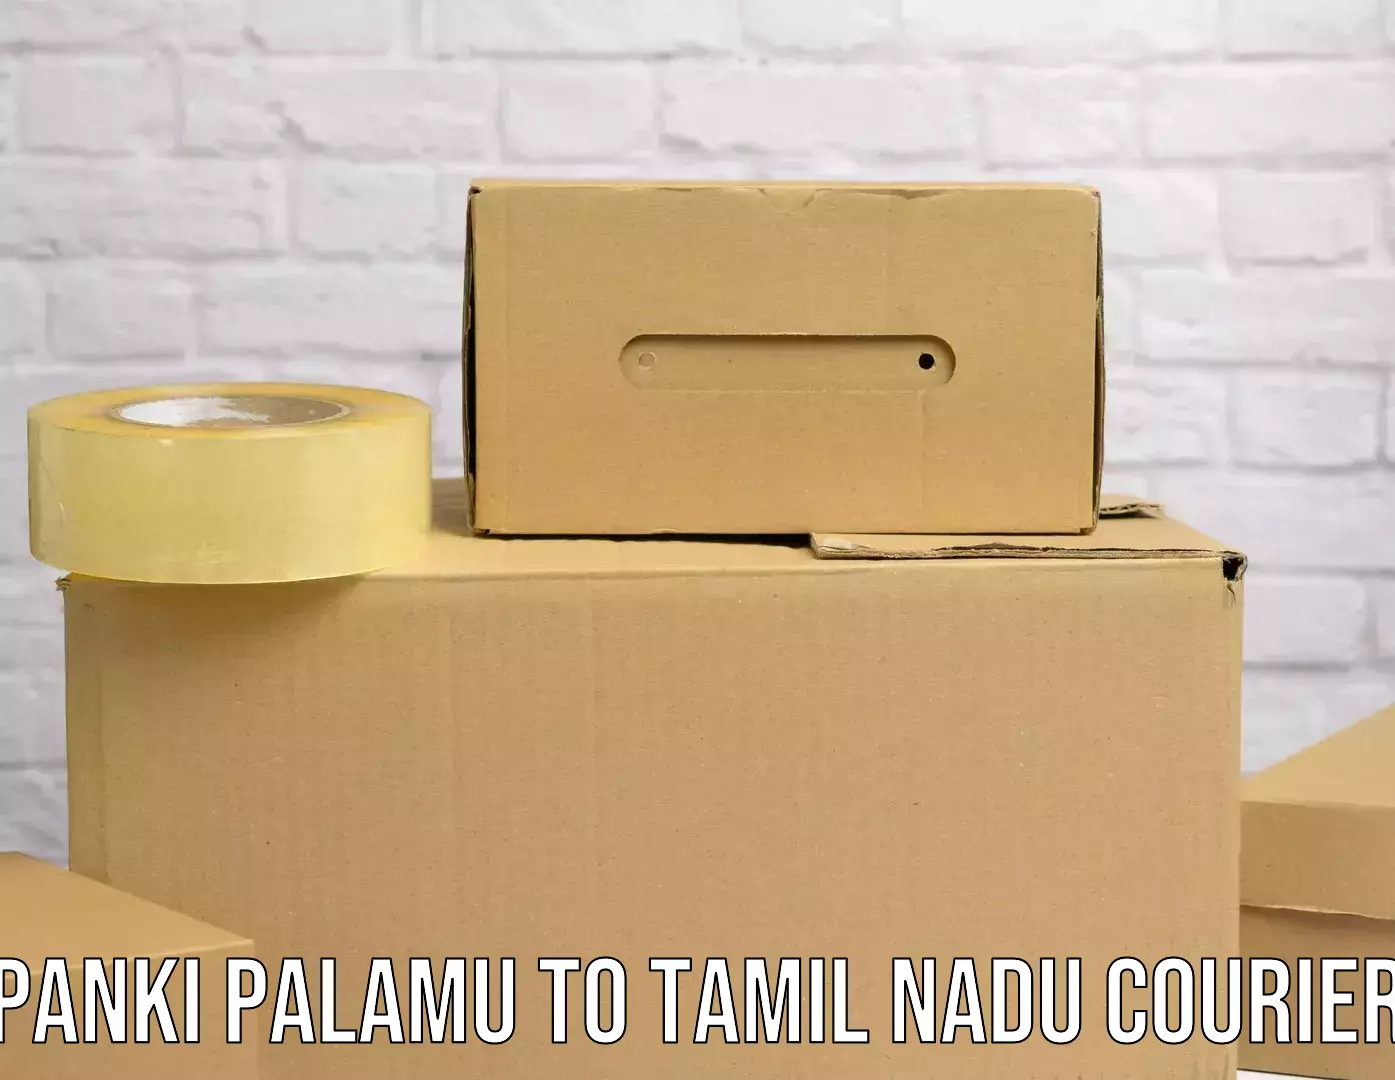 Advanced courier platforms Panki Palamu to Meenakshi Academy of Higher Education and Research Chennai